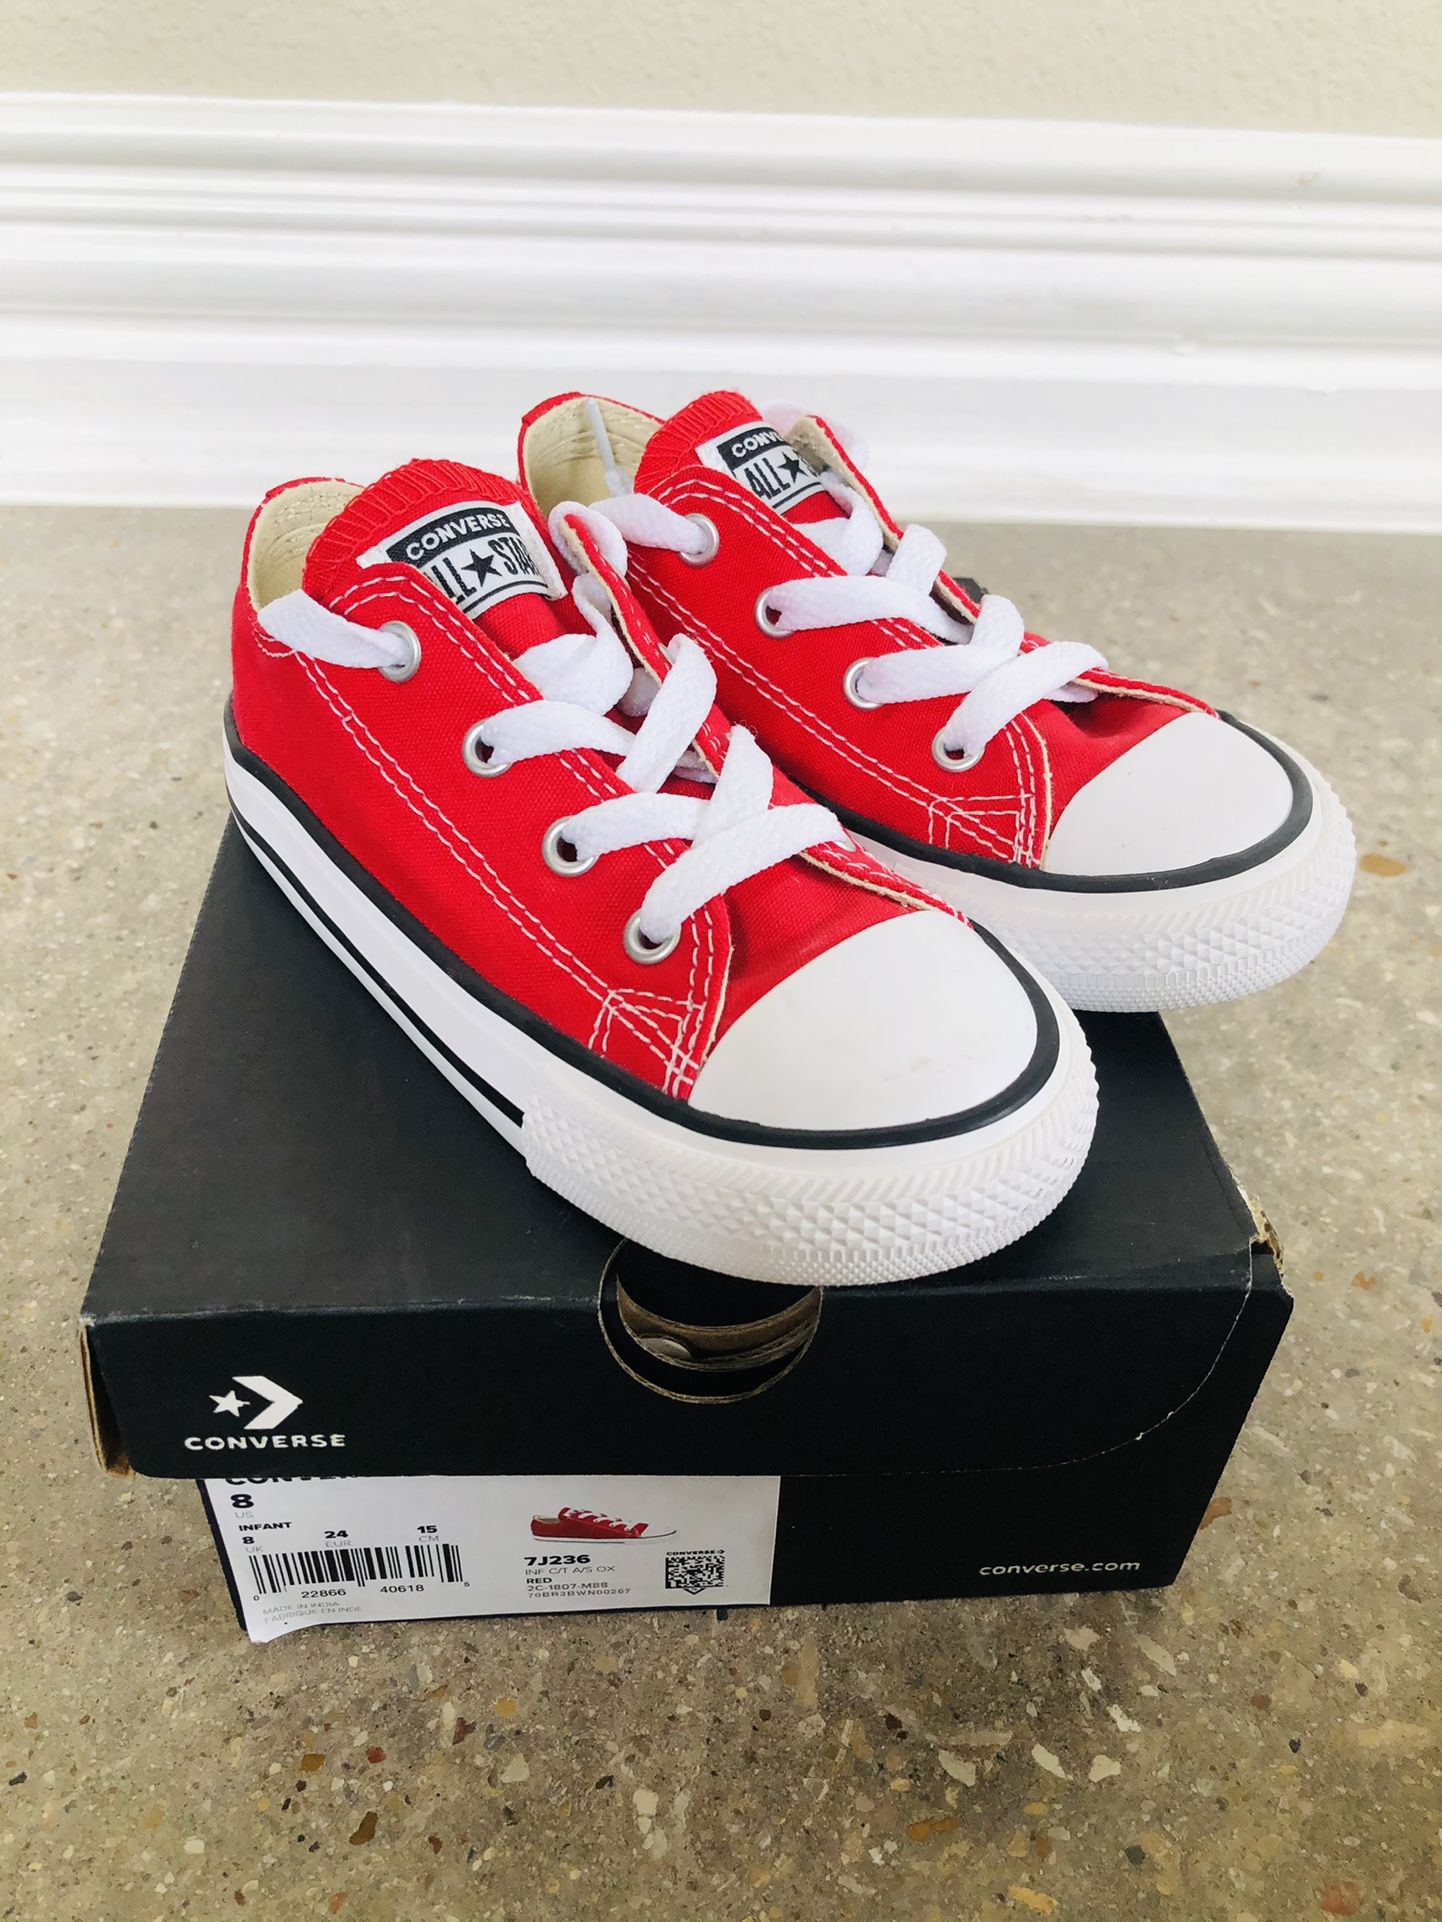 Converse - Kids Size 8 Red